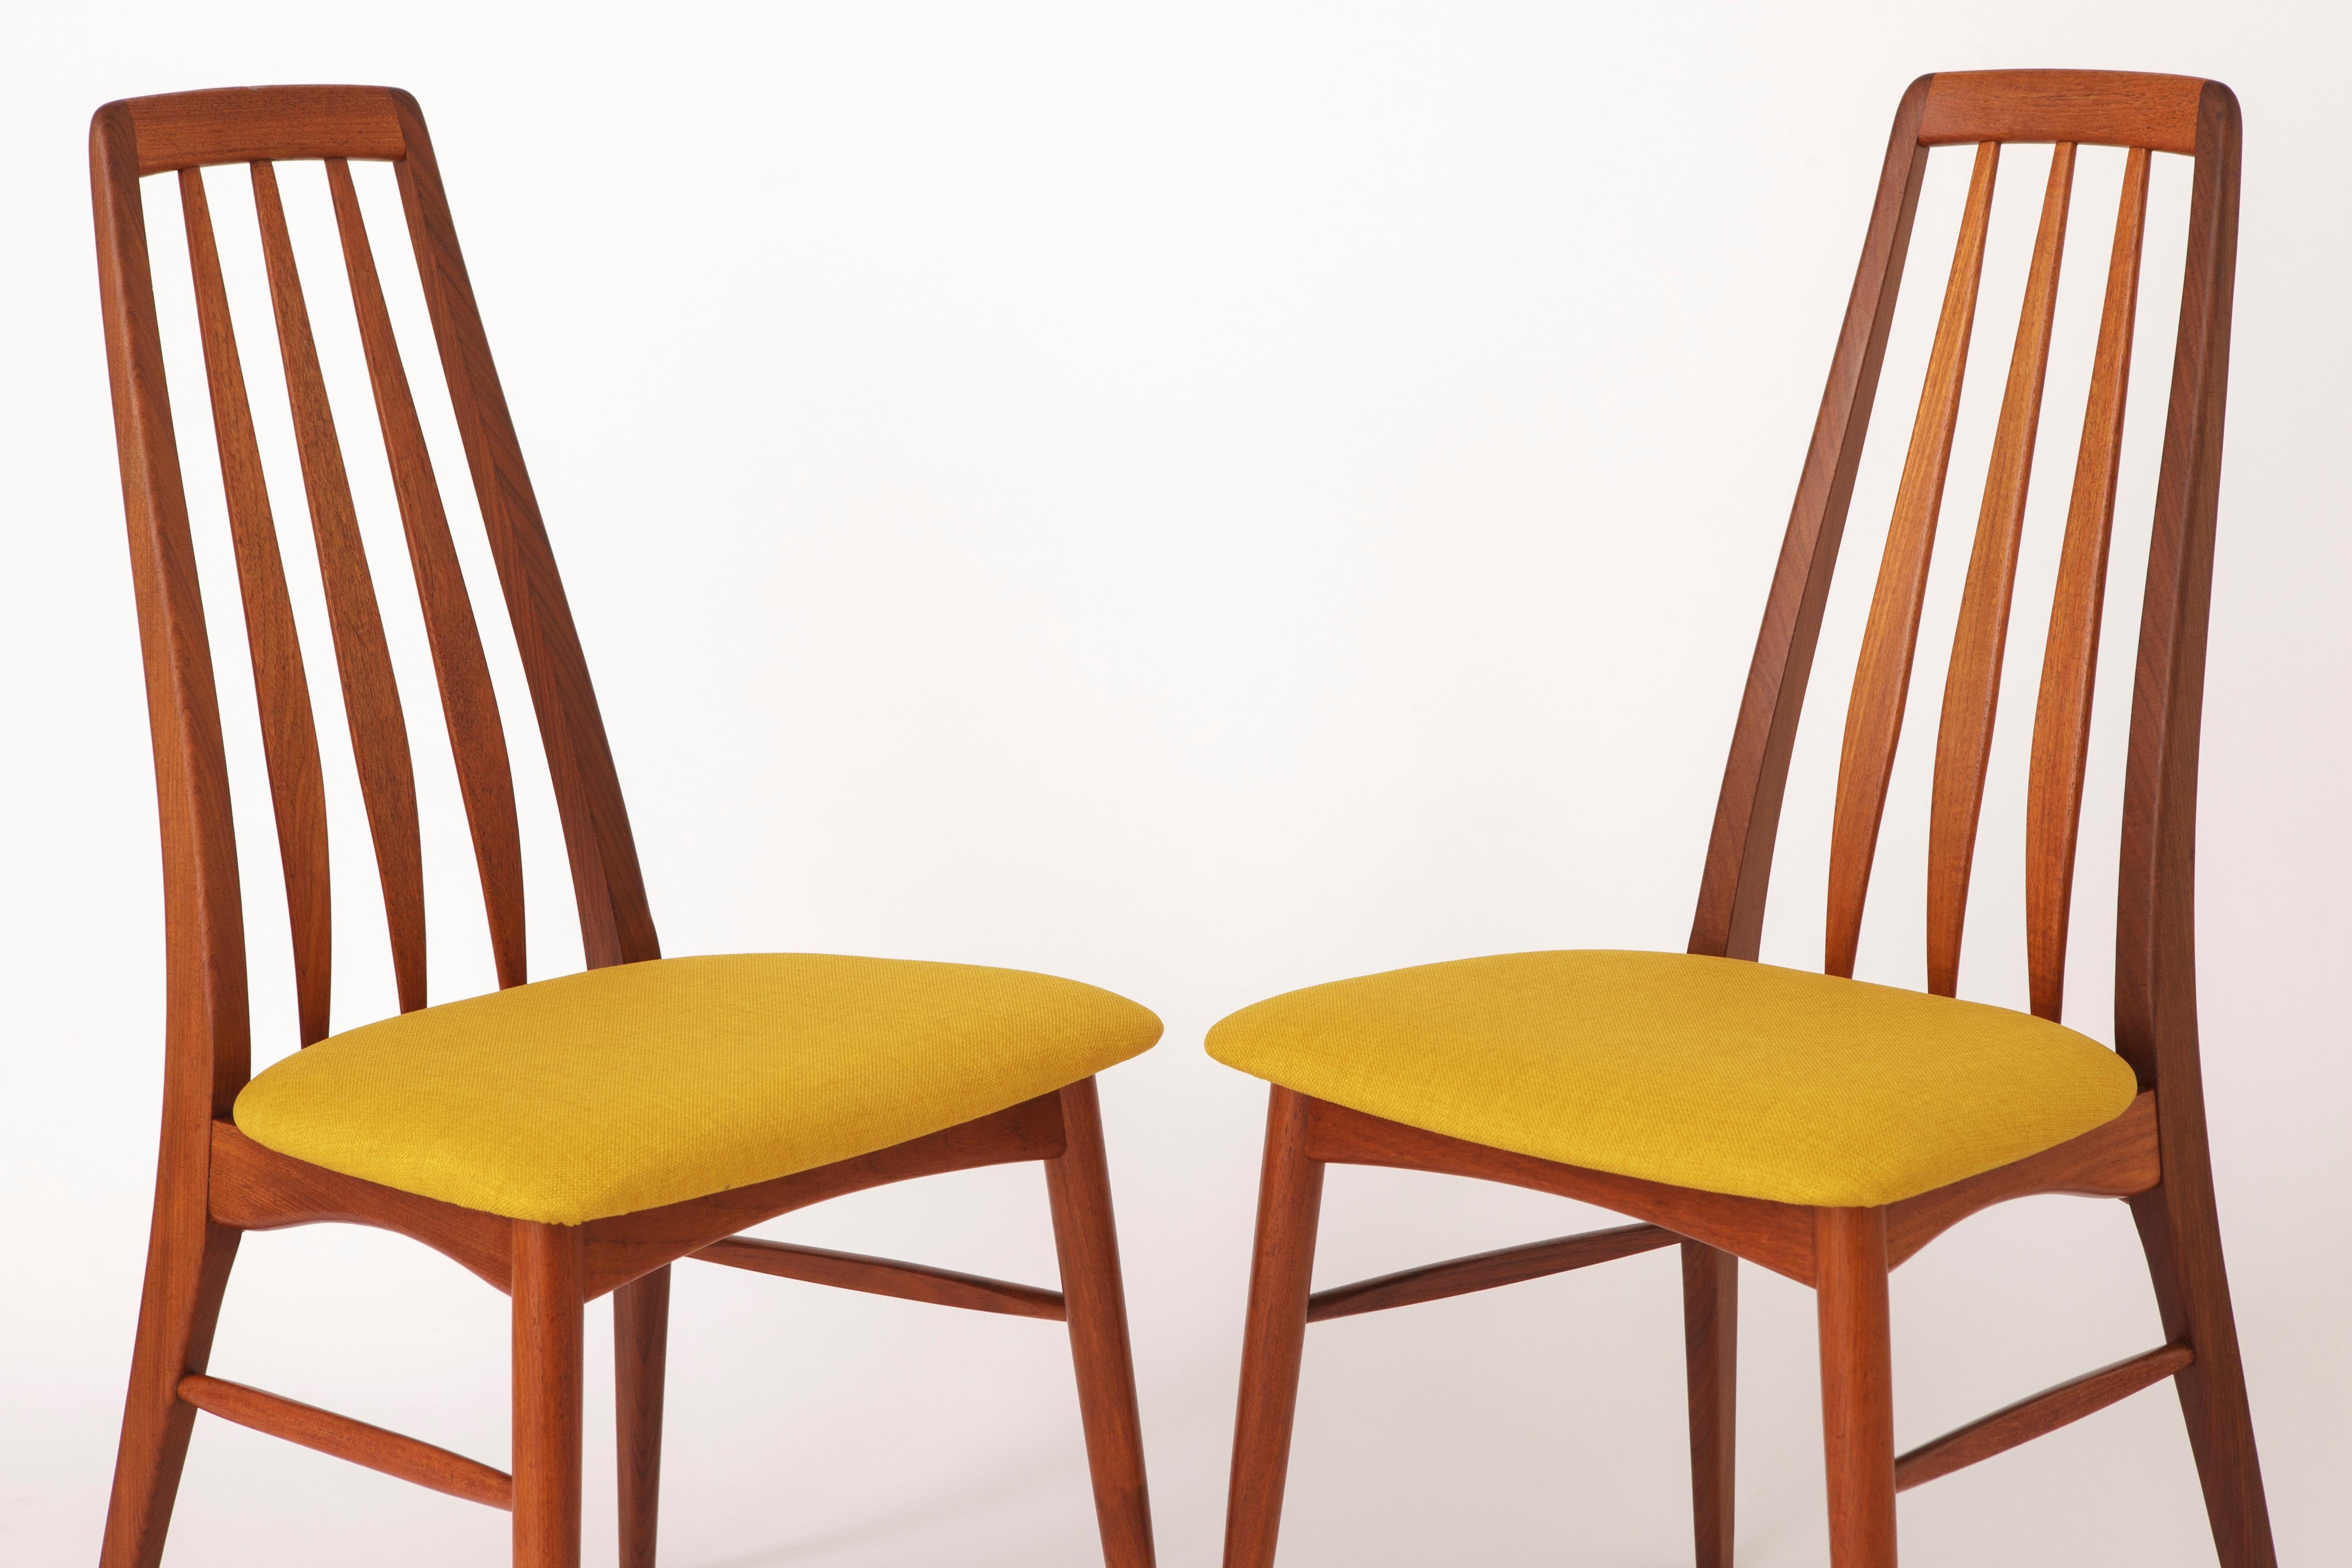 6 Niels Koefoed Dining Chairs Eva, 1960s Vintage - Set of 6 In Distressed Condition For Sale In Hannover, DE